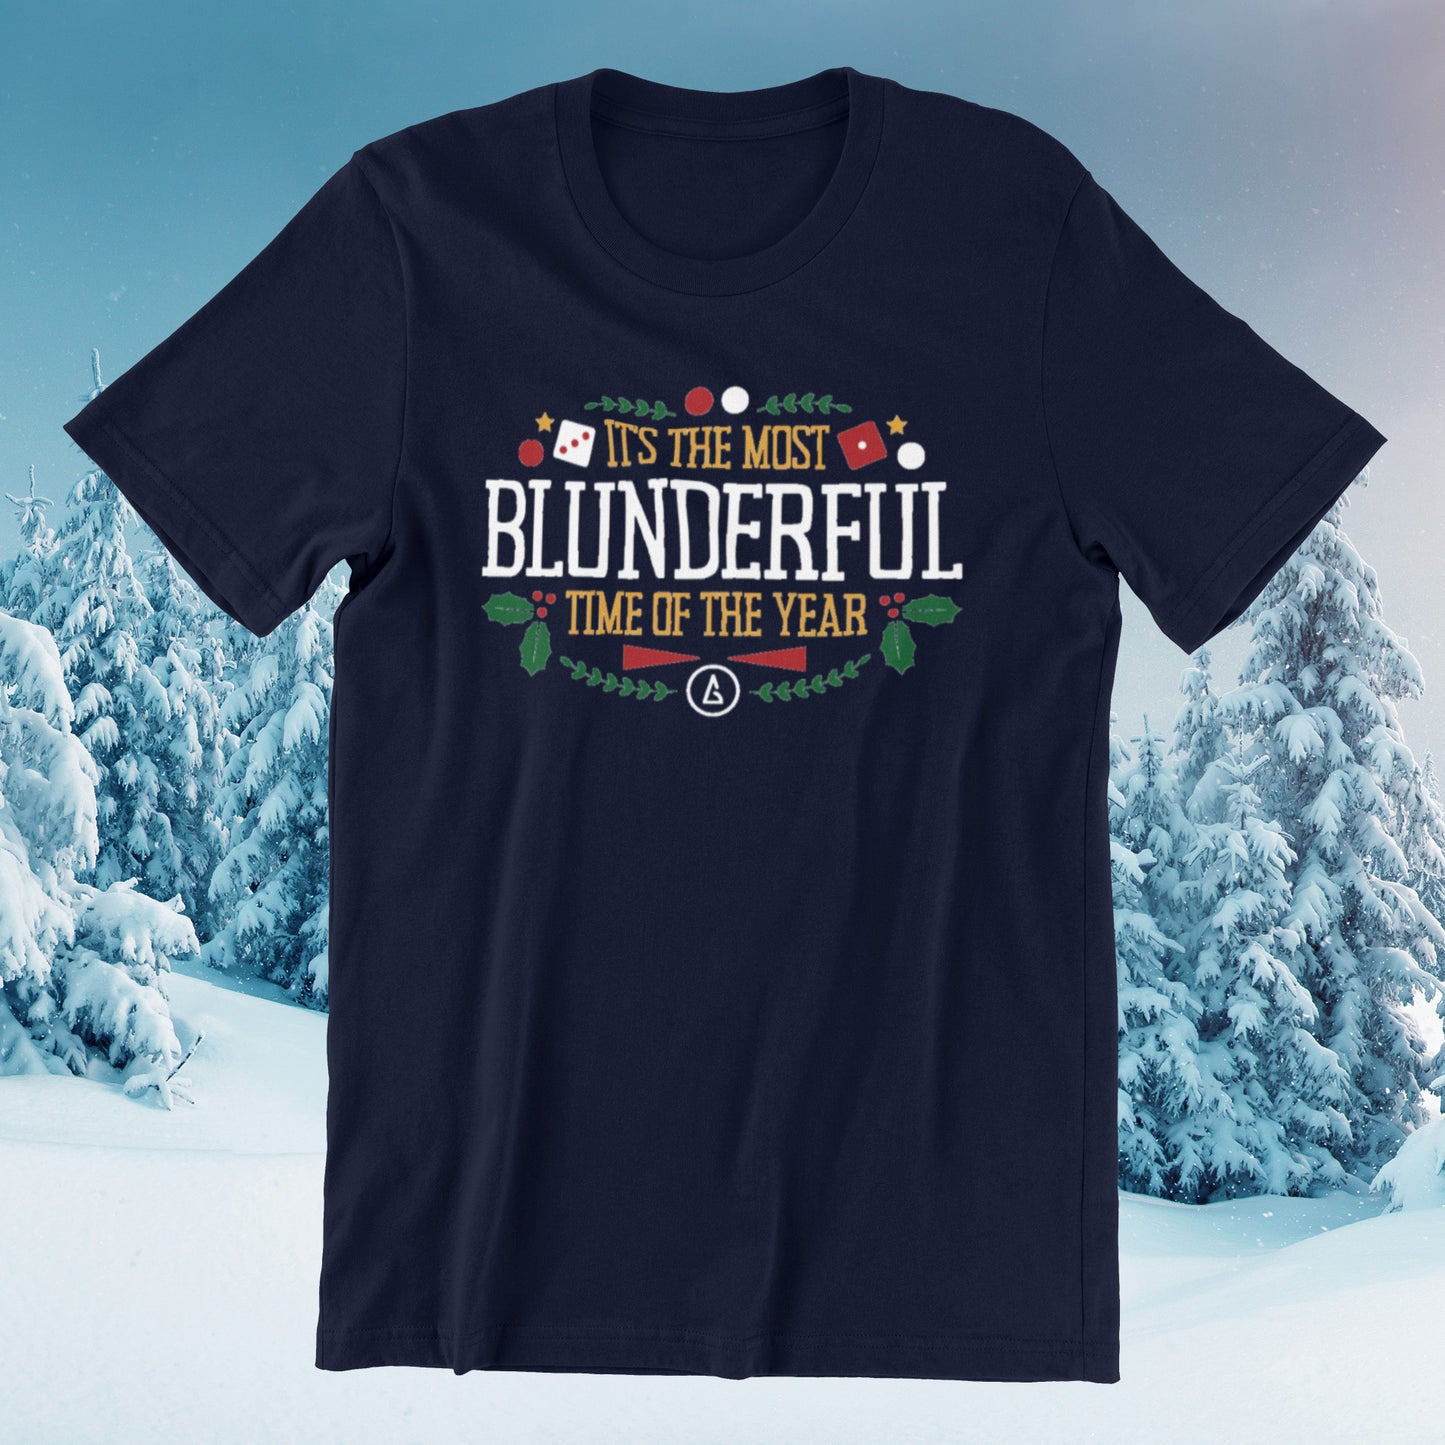 "It's The Most Blunderful Time Of The Year" XMAS T-Shirt